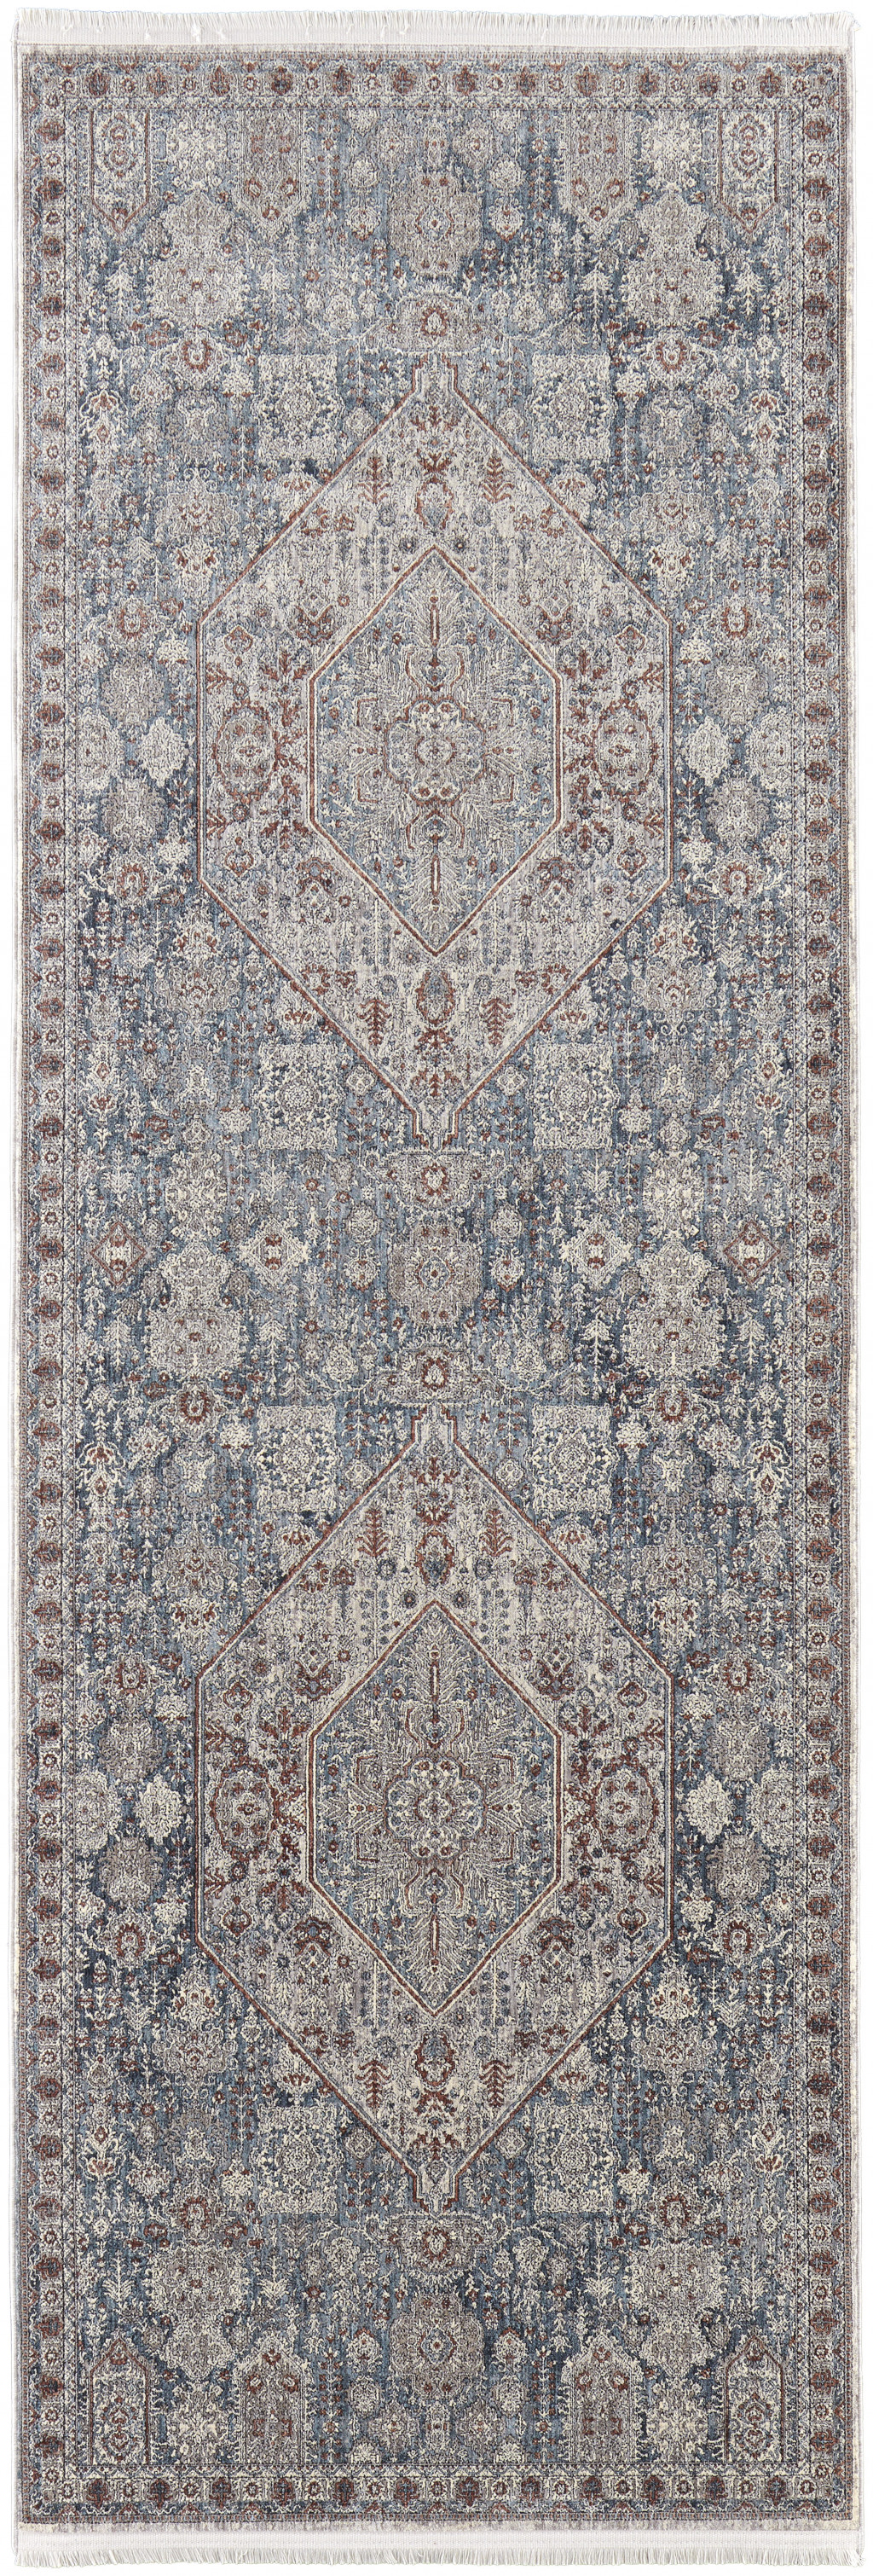 12' Blue And Ivory Floral Power Loom Runner Rug-514480-1